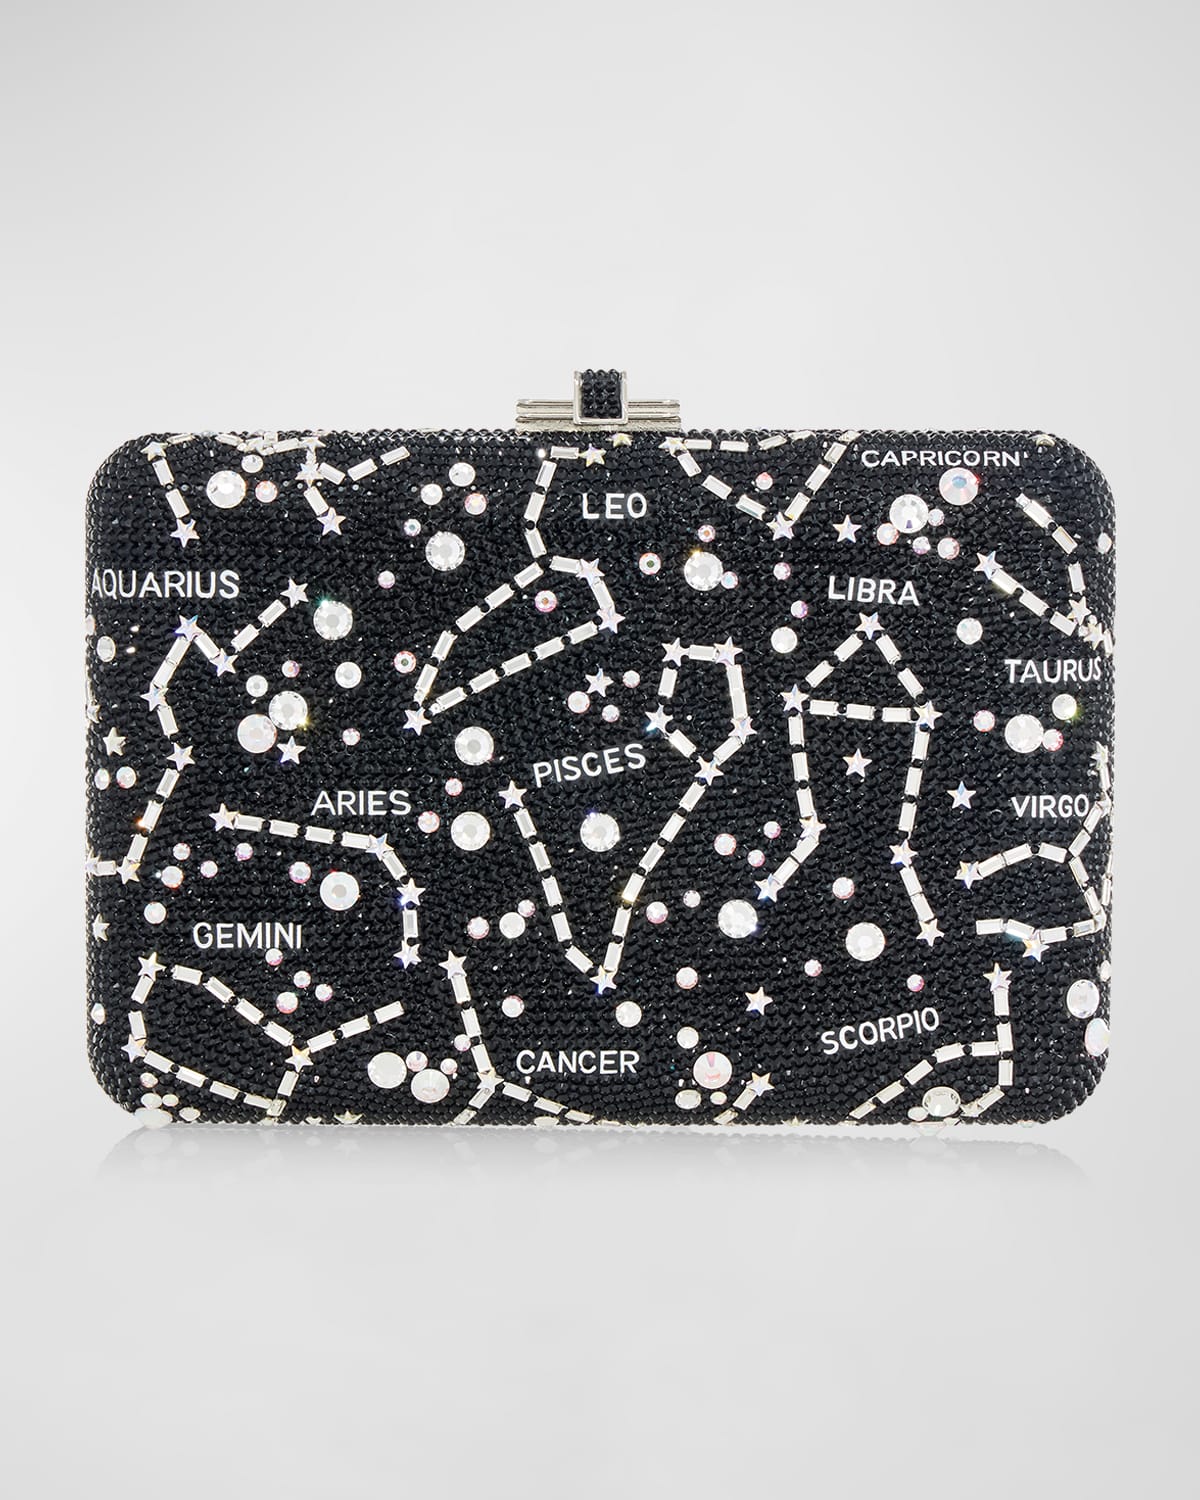 Slim Slide Zodiac Sign Constellations Clutch With Removable Chain Strap